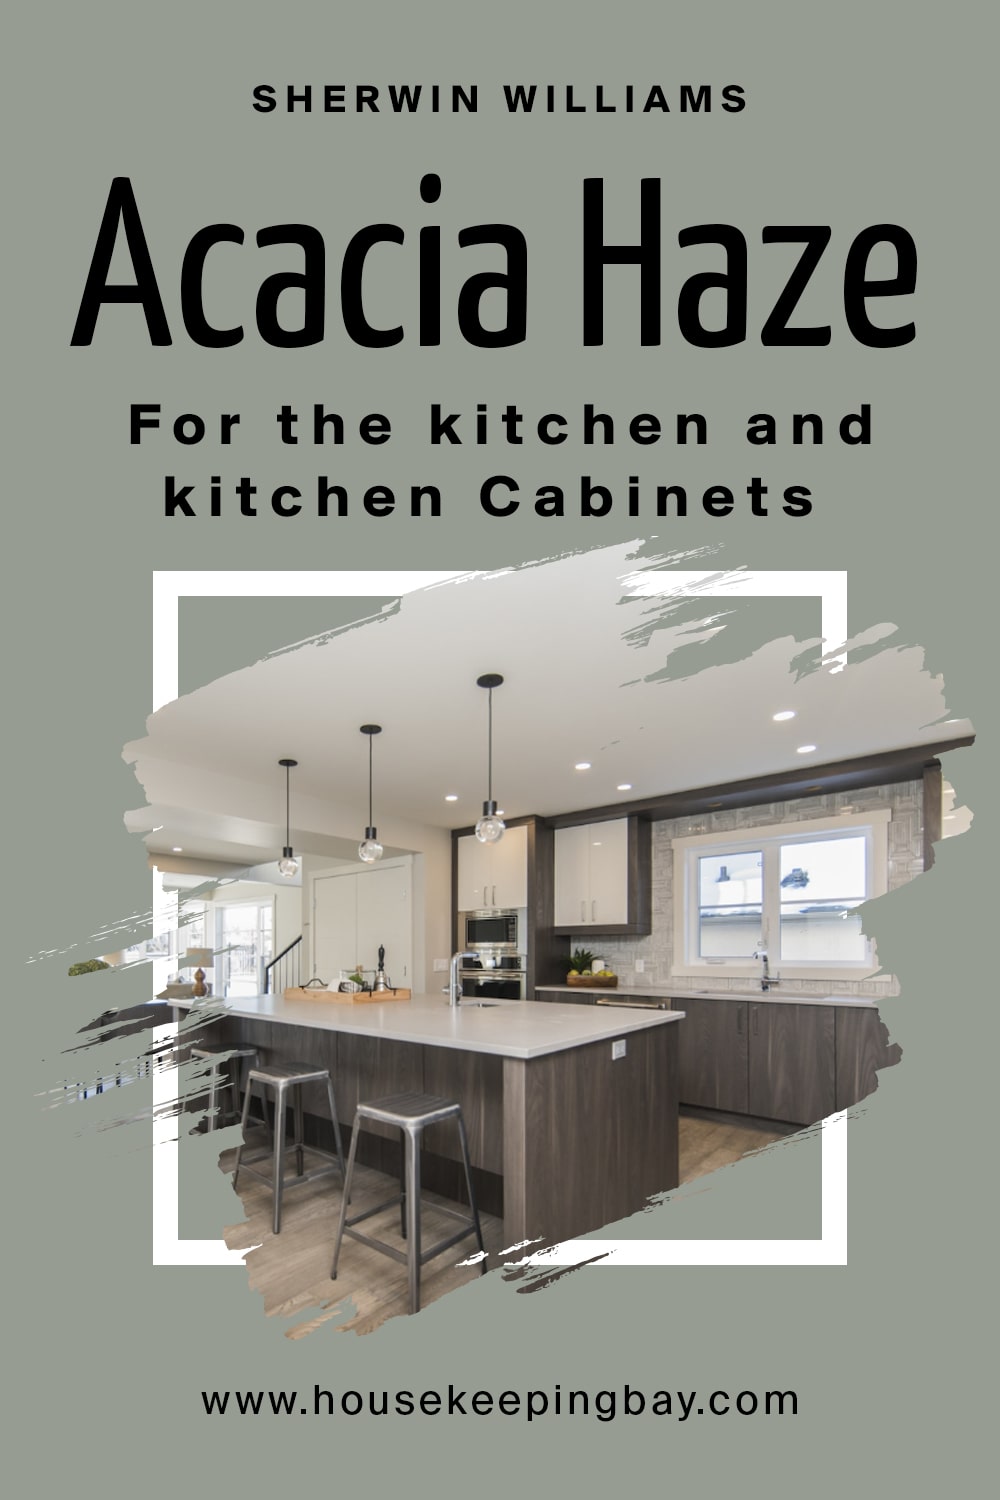 Sherwin Williams. Acacia Haze For the kitchen and kitchen Cabinets